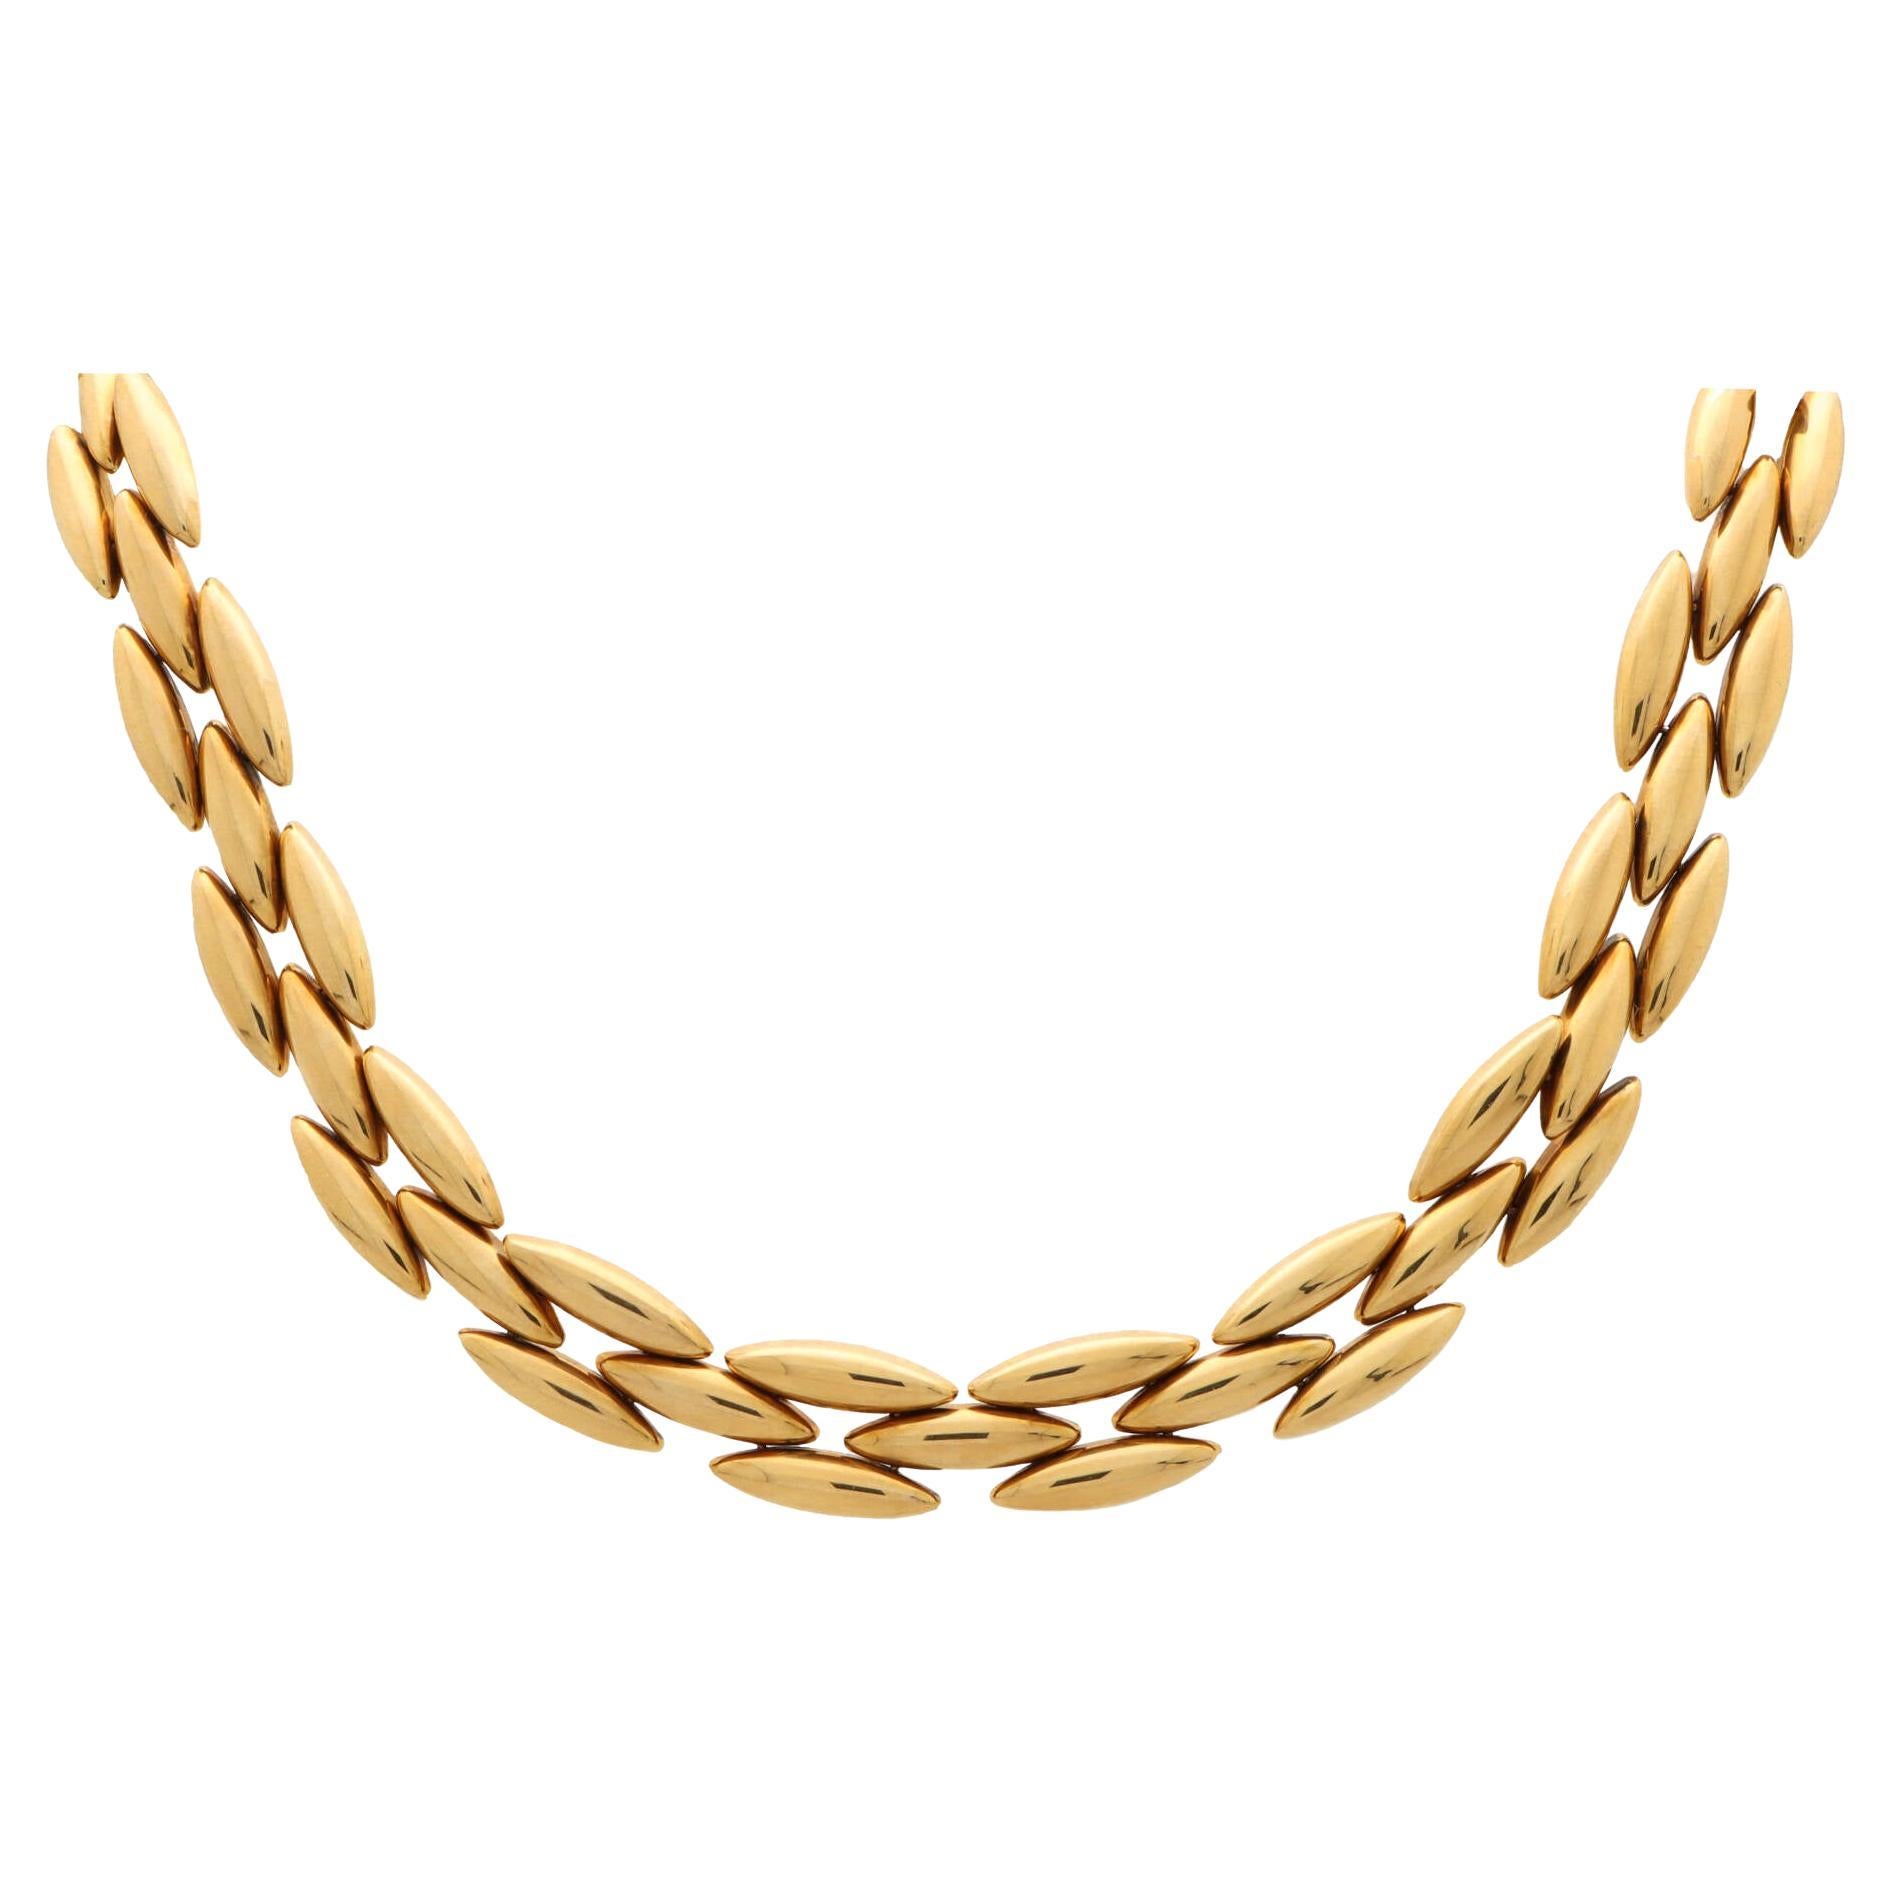 Vintage Cartier 'Gentiane' Oval Link Necklace in 18k Yellow Gold